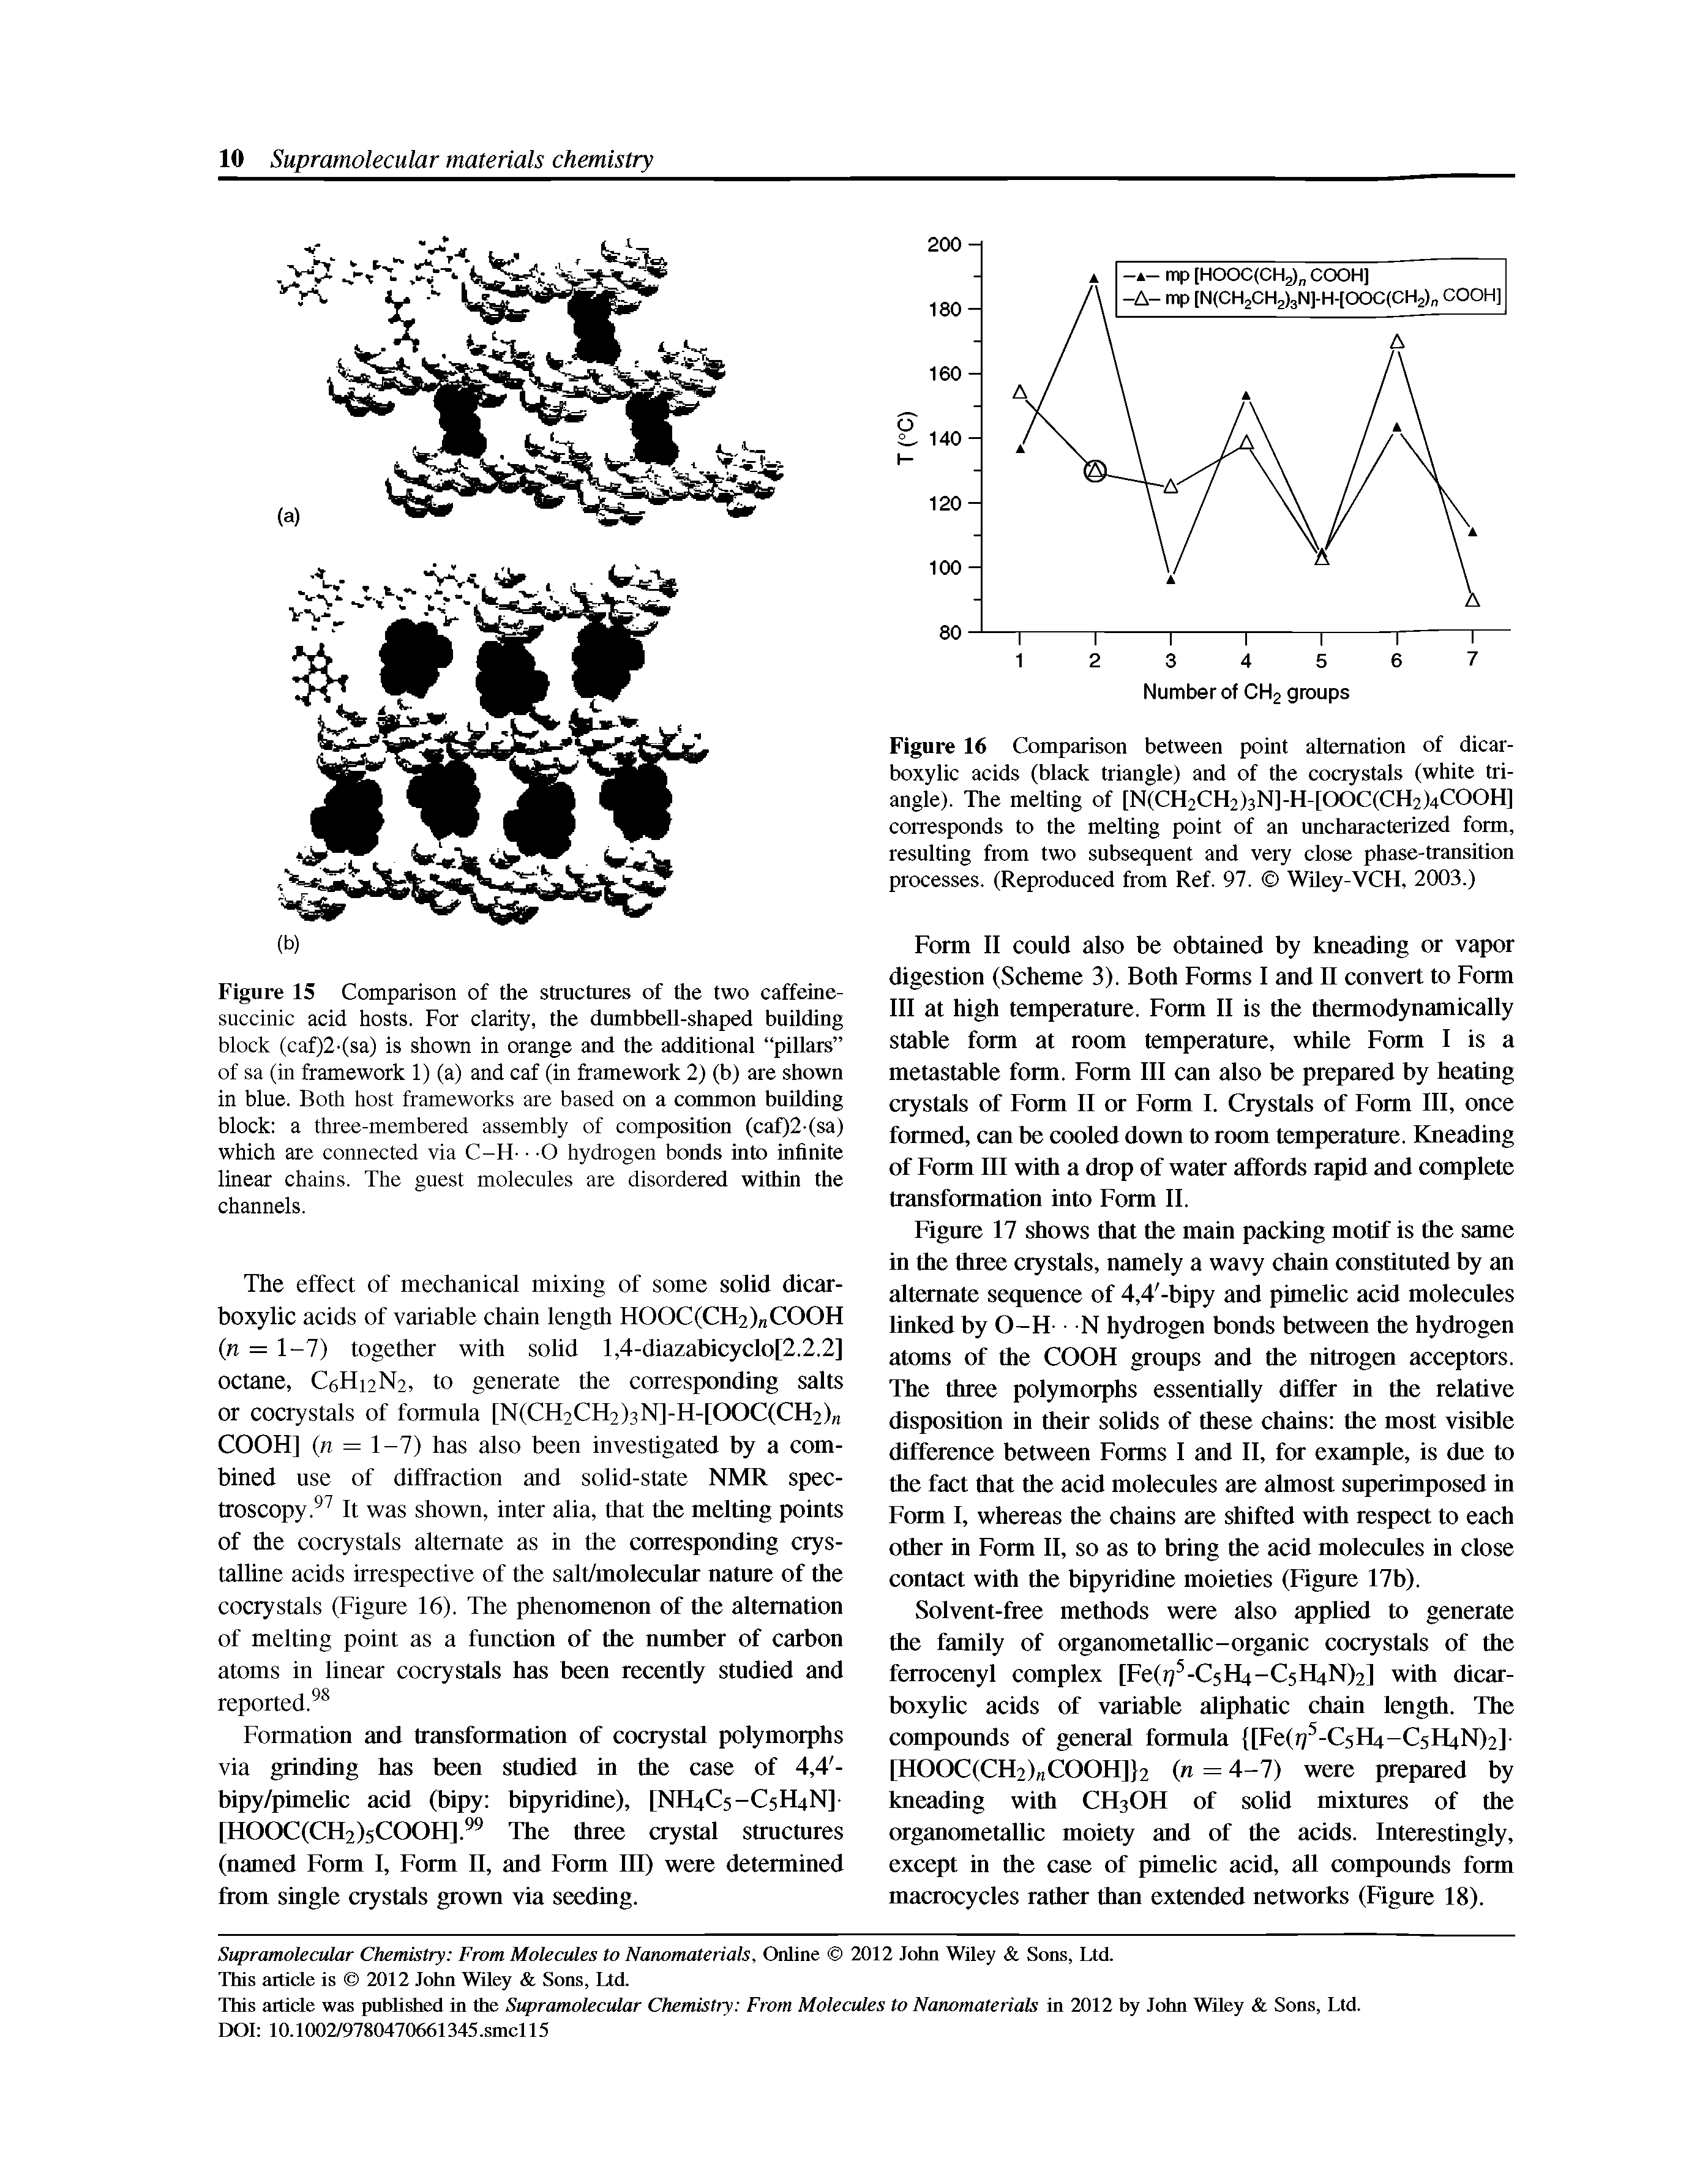 Figure 16 Comparison between point alternation of dicar-boxylic acids (black triangle) and of the cocrystals (white triangle). The melting of [N(CH2CH2)3N]-H-[OOC(CH2)4COOH] corresponds to the melting point of an uncharacterized form, resulting from two subsequent and very close phase-transition processes. (Reproduced from Ref. 97. WUey-VCH, 2003.)...